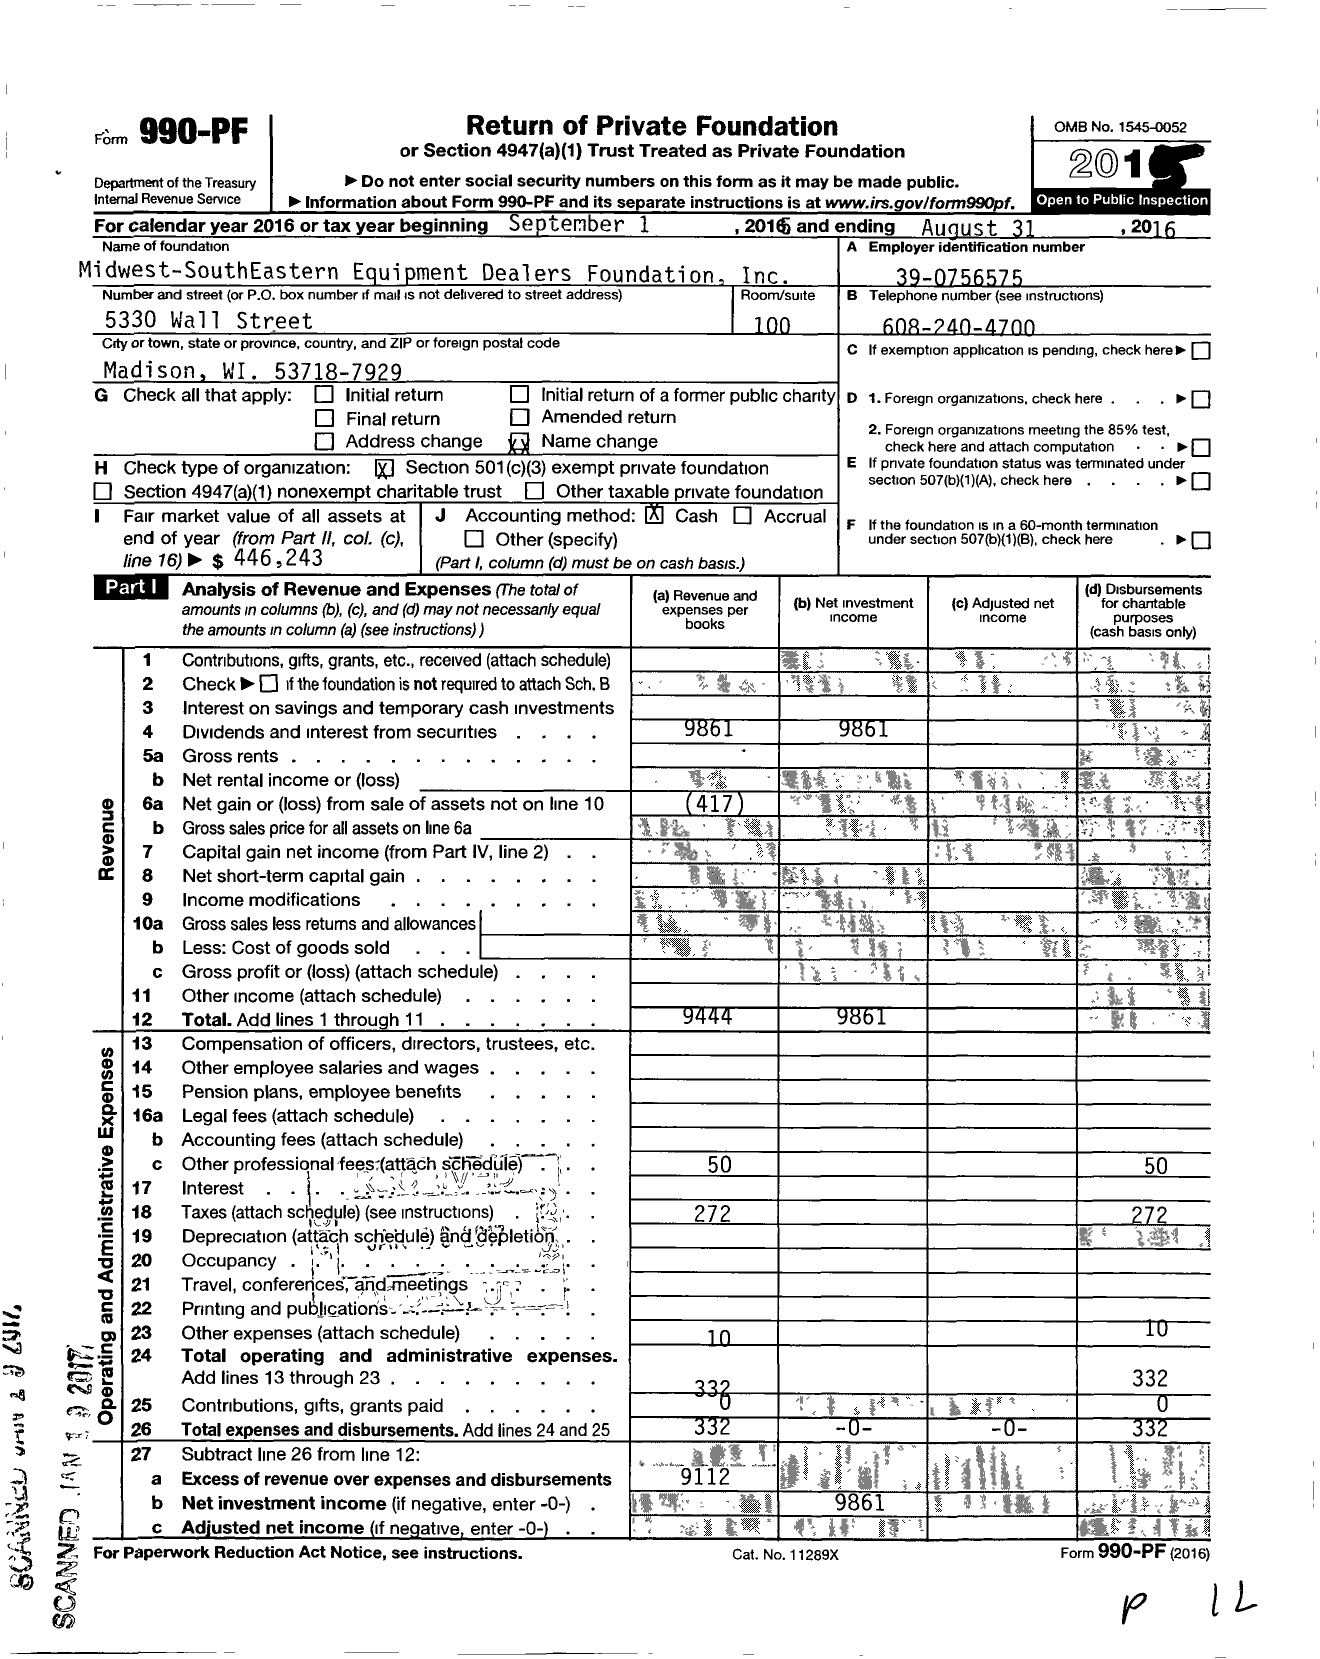 Image of first page of 2015 Form 990PF for Midwest-Southeastern Equipment Dealers Foundation